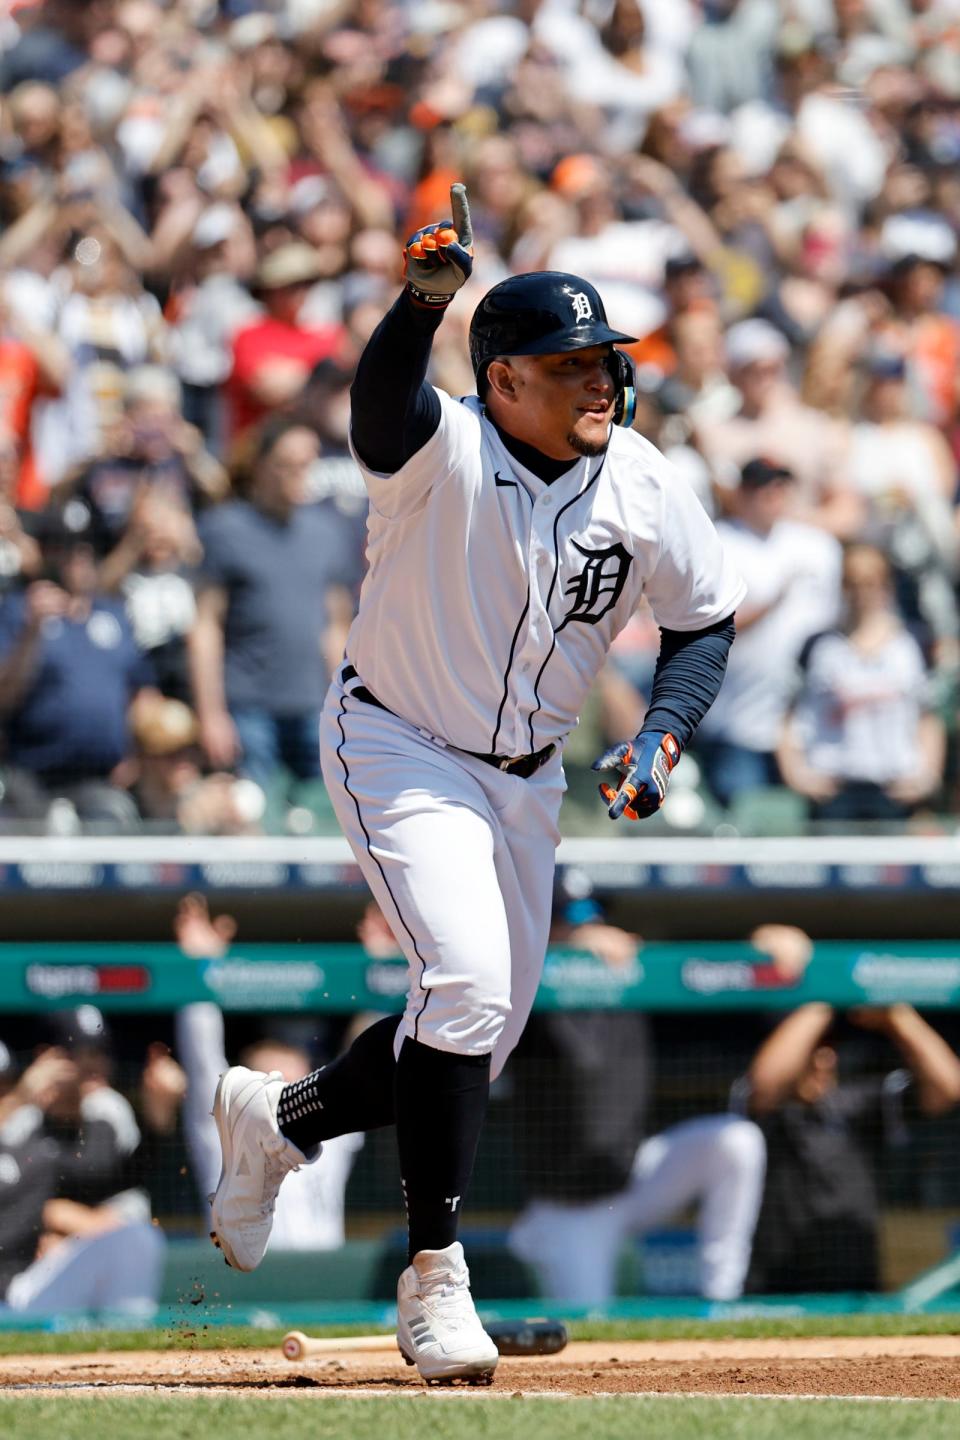 Detroit Tigers designated hitter Miguel Cabrera celebrates after he singles for his 3,000th career hit in the first inning against the Colorado Rockies at Comerica Park, April 23, 2022.